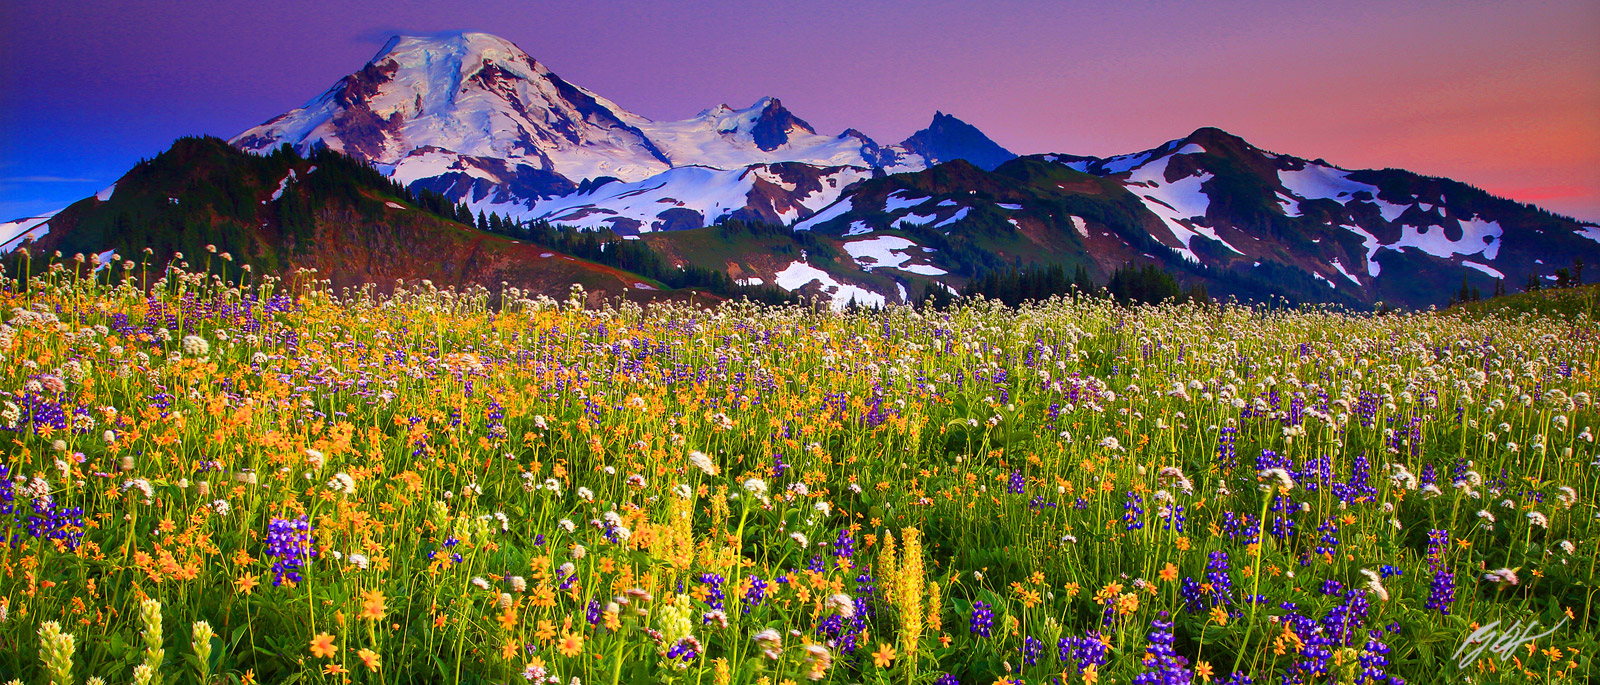 Sunset Wildflowers and Mt Baker from Skyline Divide in the Mt Baker Wilderness in Washington